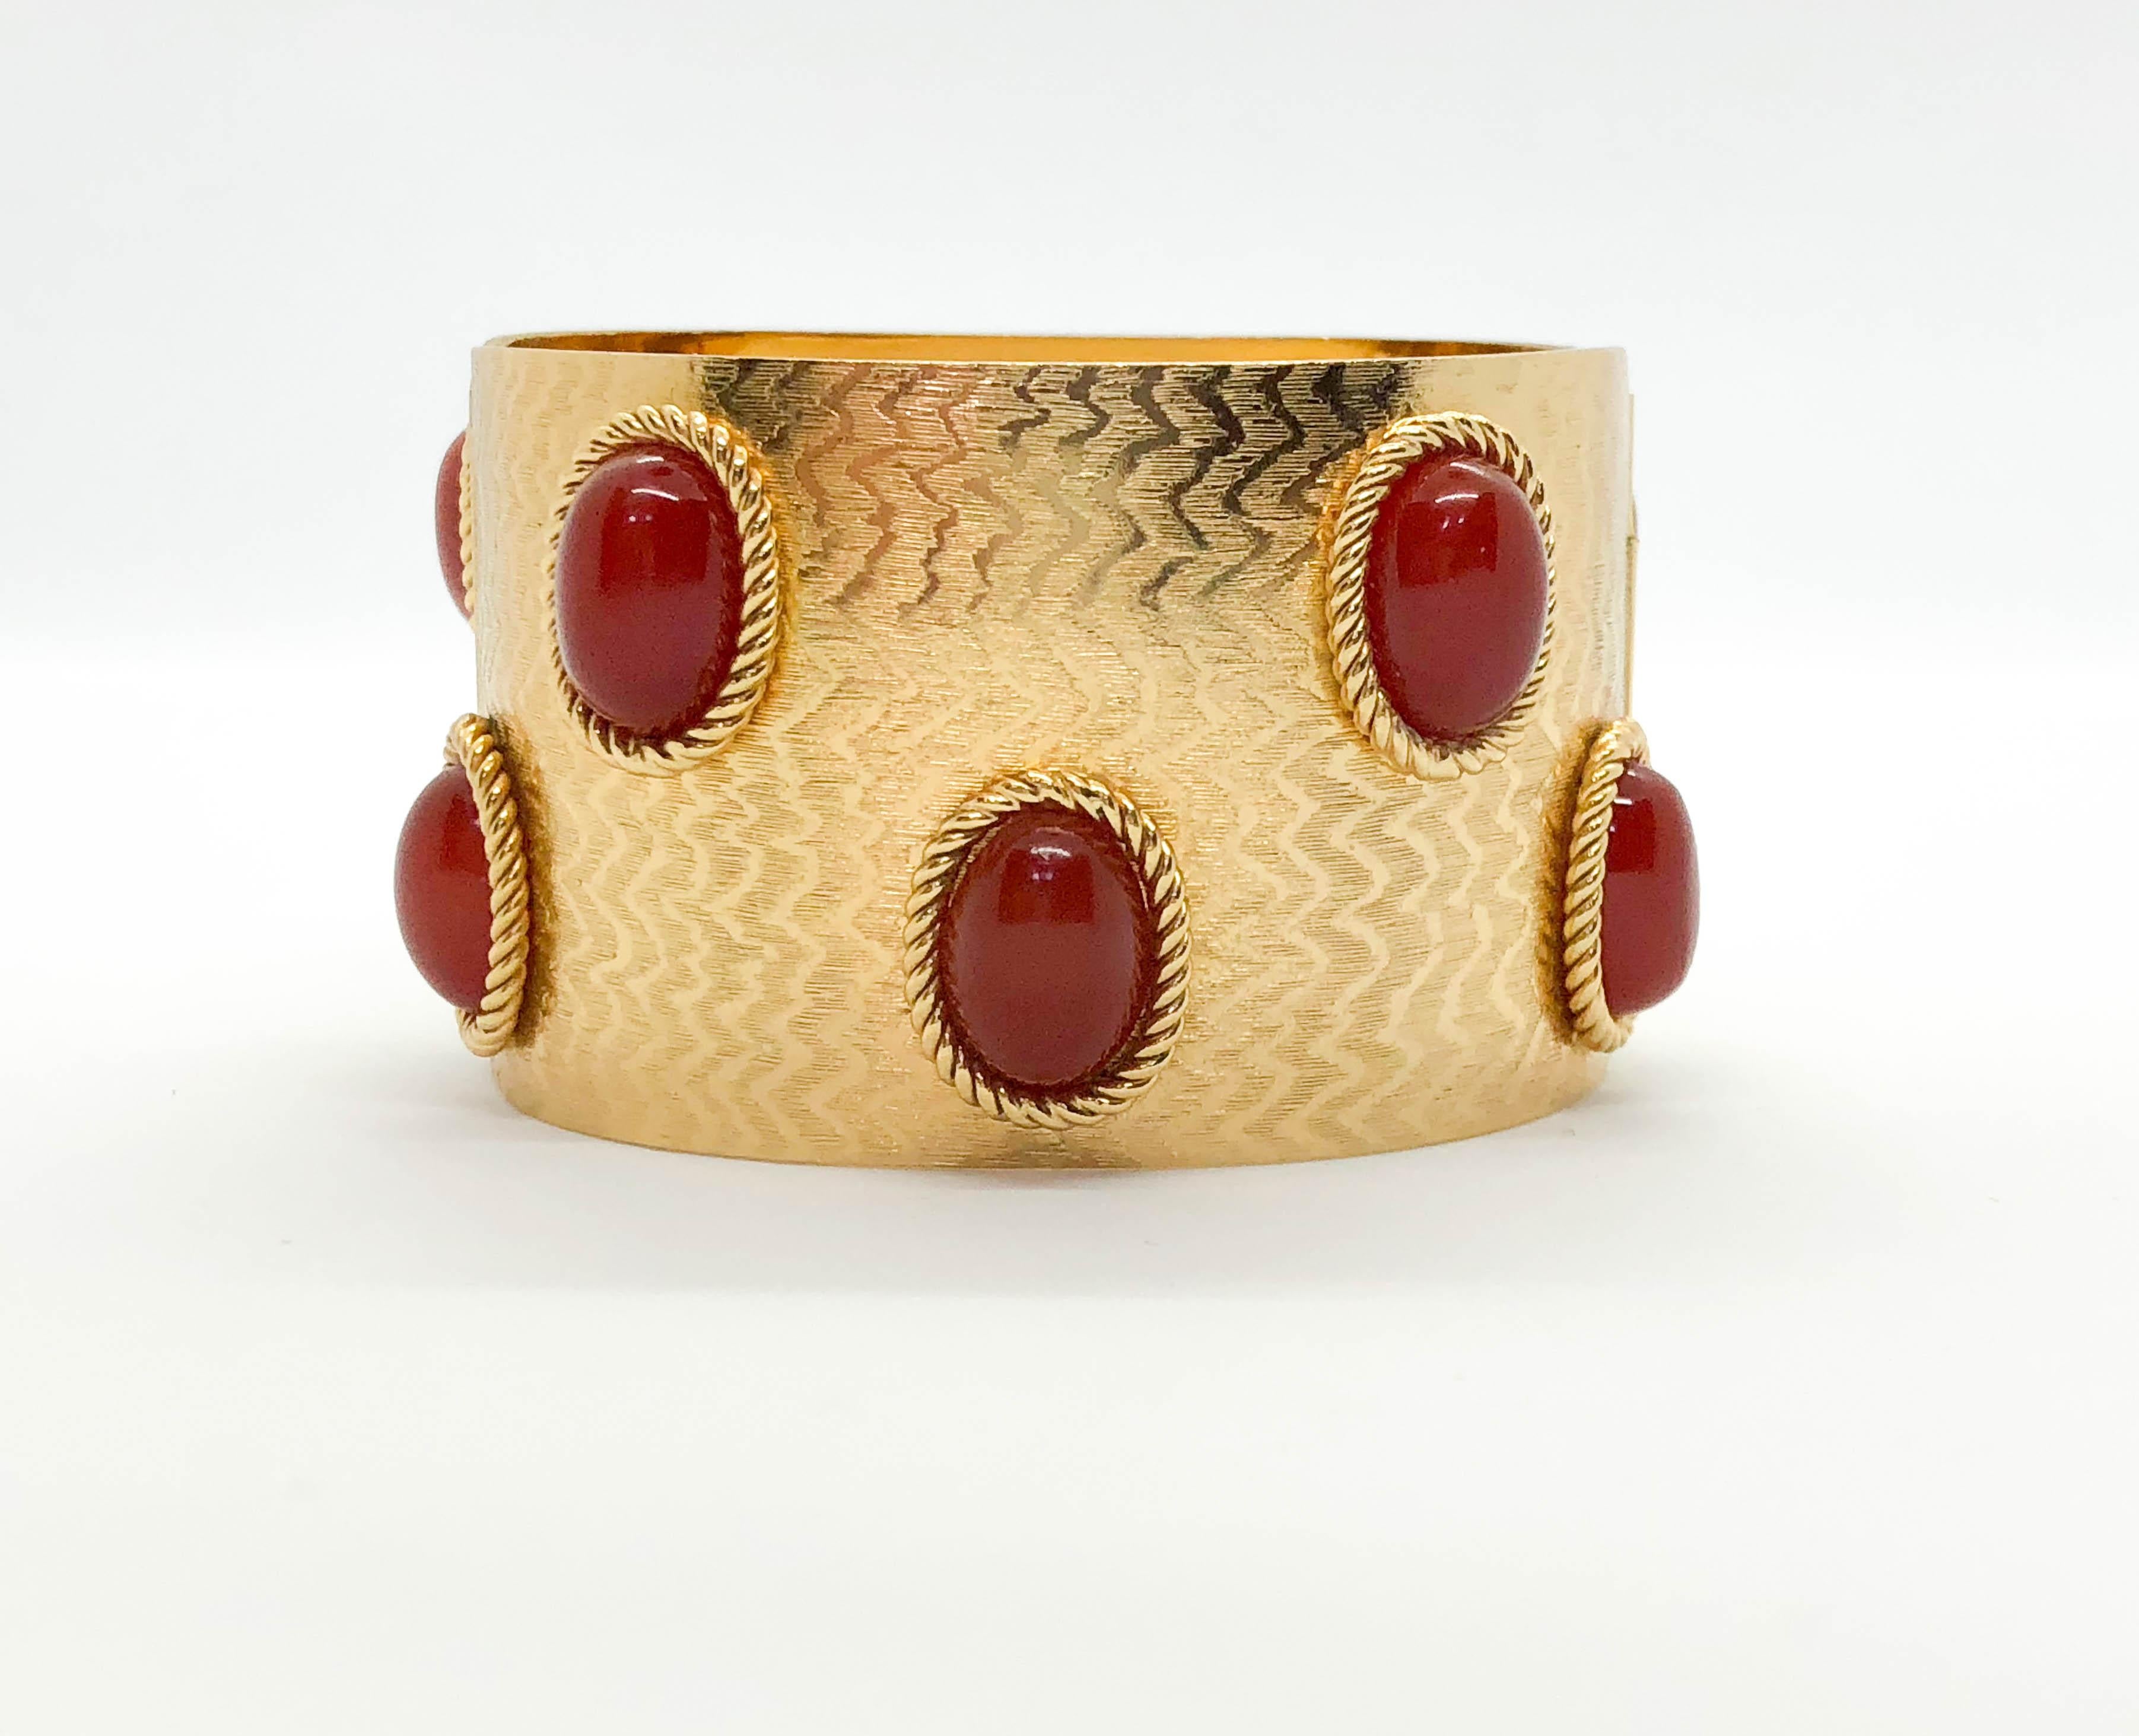 1968 Dior Gold-Plated Cuff Bracelet Embellished with Faux Amber Beads For Sale 7